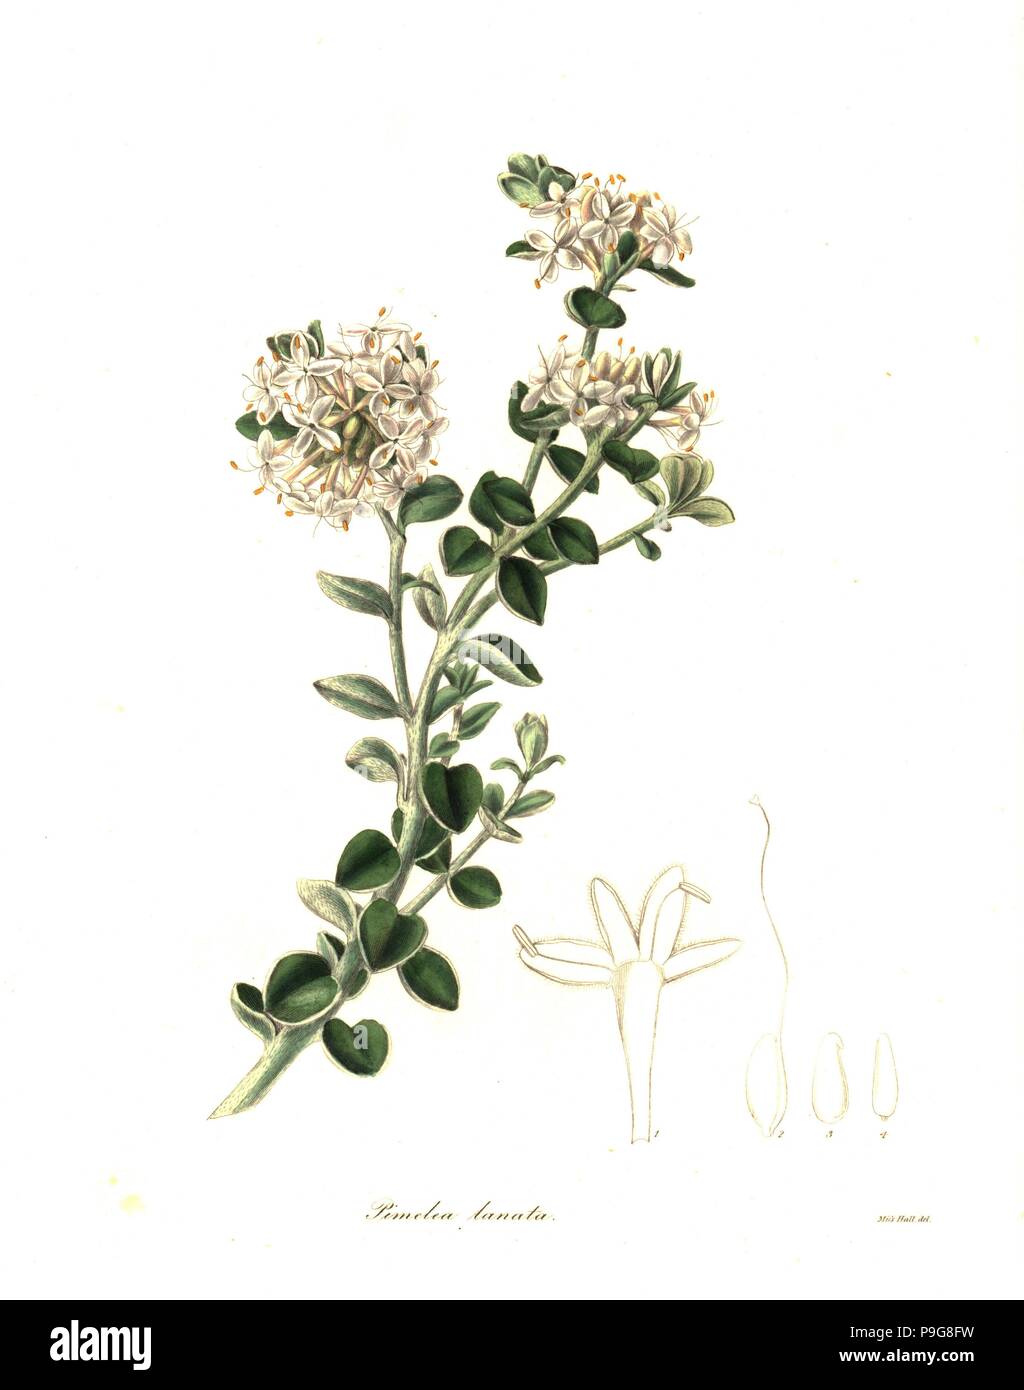 Woolly pimelea, Pimelea lanata. Handcoloured copperplate engraving after a botanical illustration by Miss Hall from Benjamin Maund and the Rev. John Stevens Henslow's The Botanist, London, 1836. Stock Photo